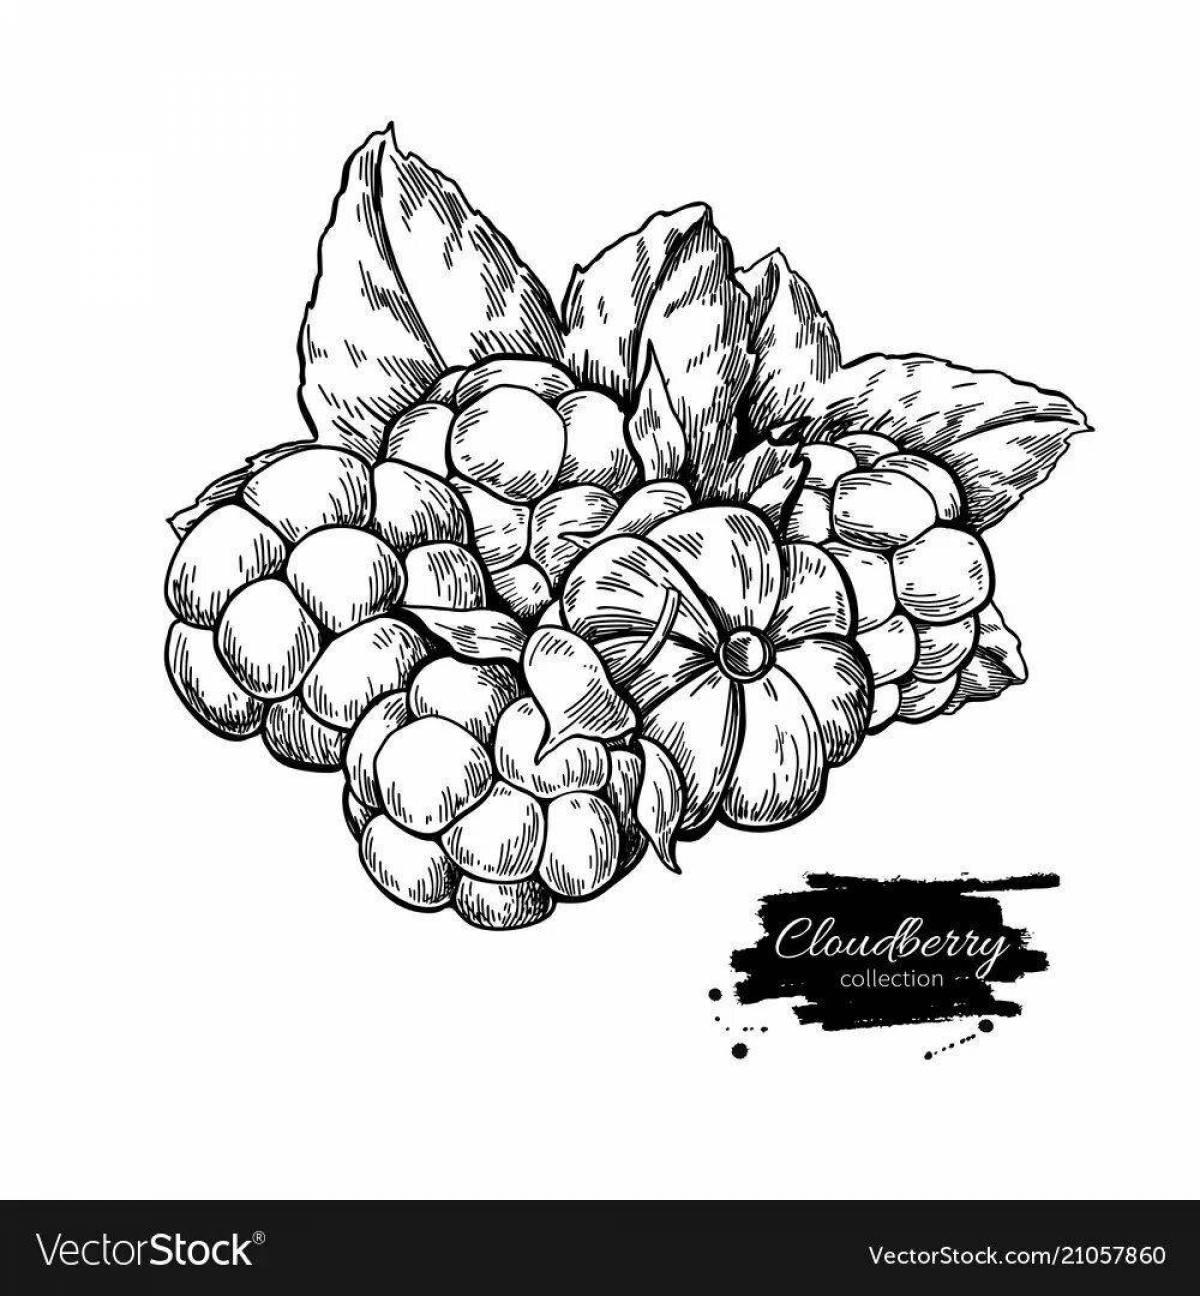 Nice cloudberry coloring book for kids